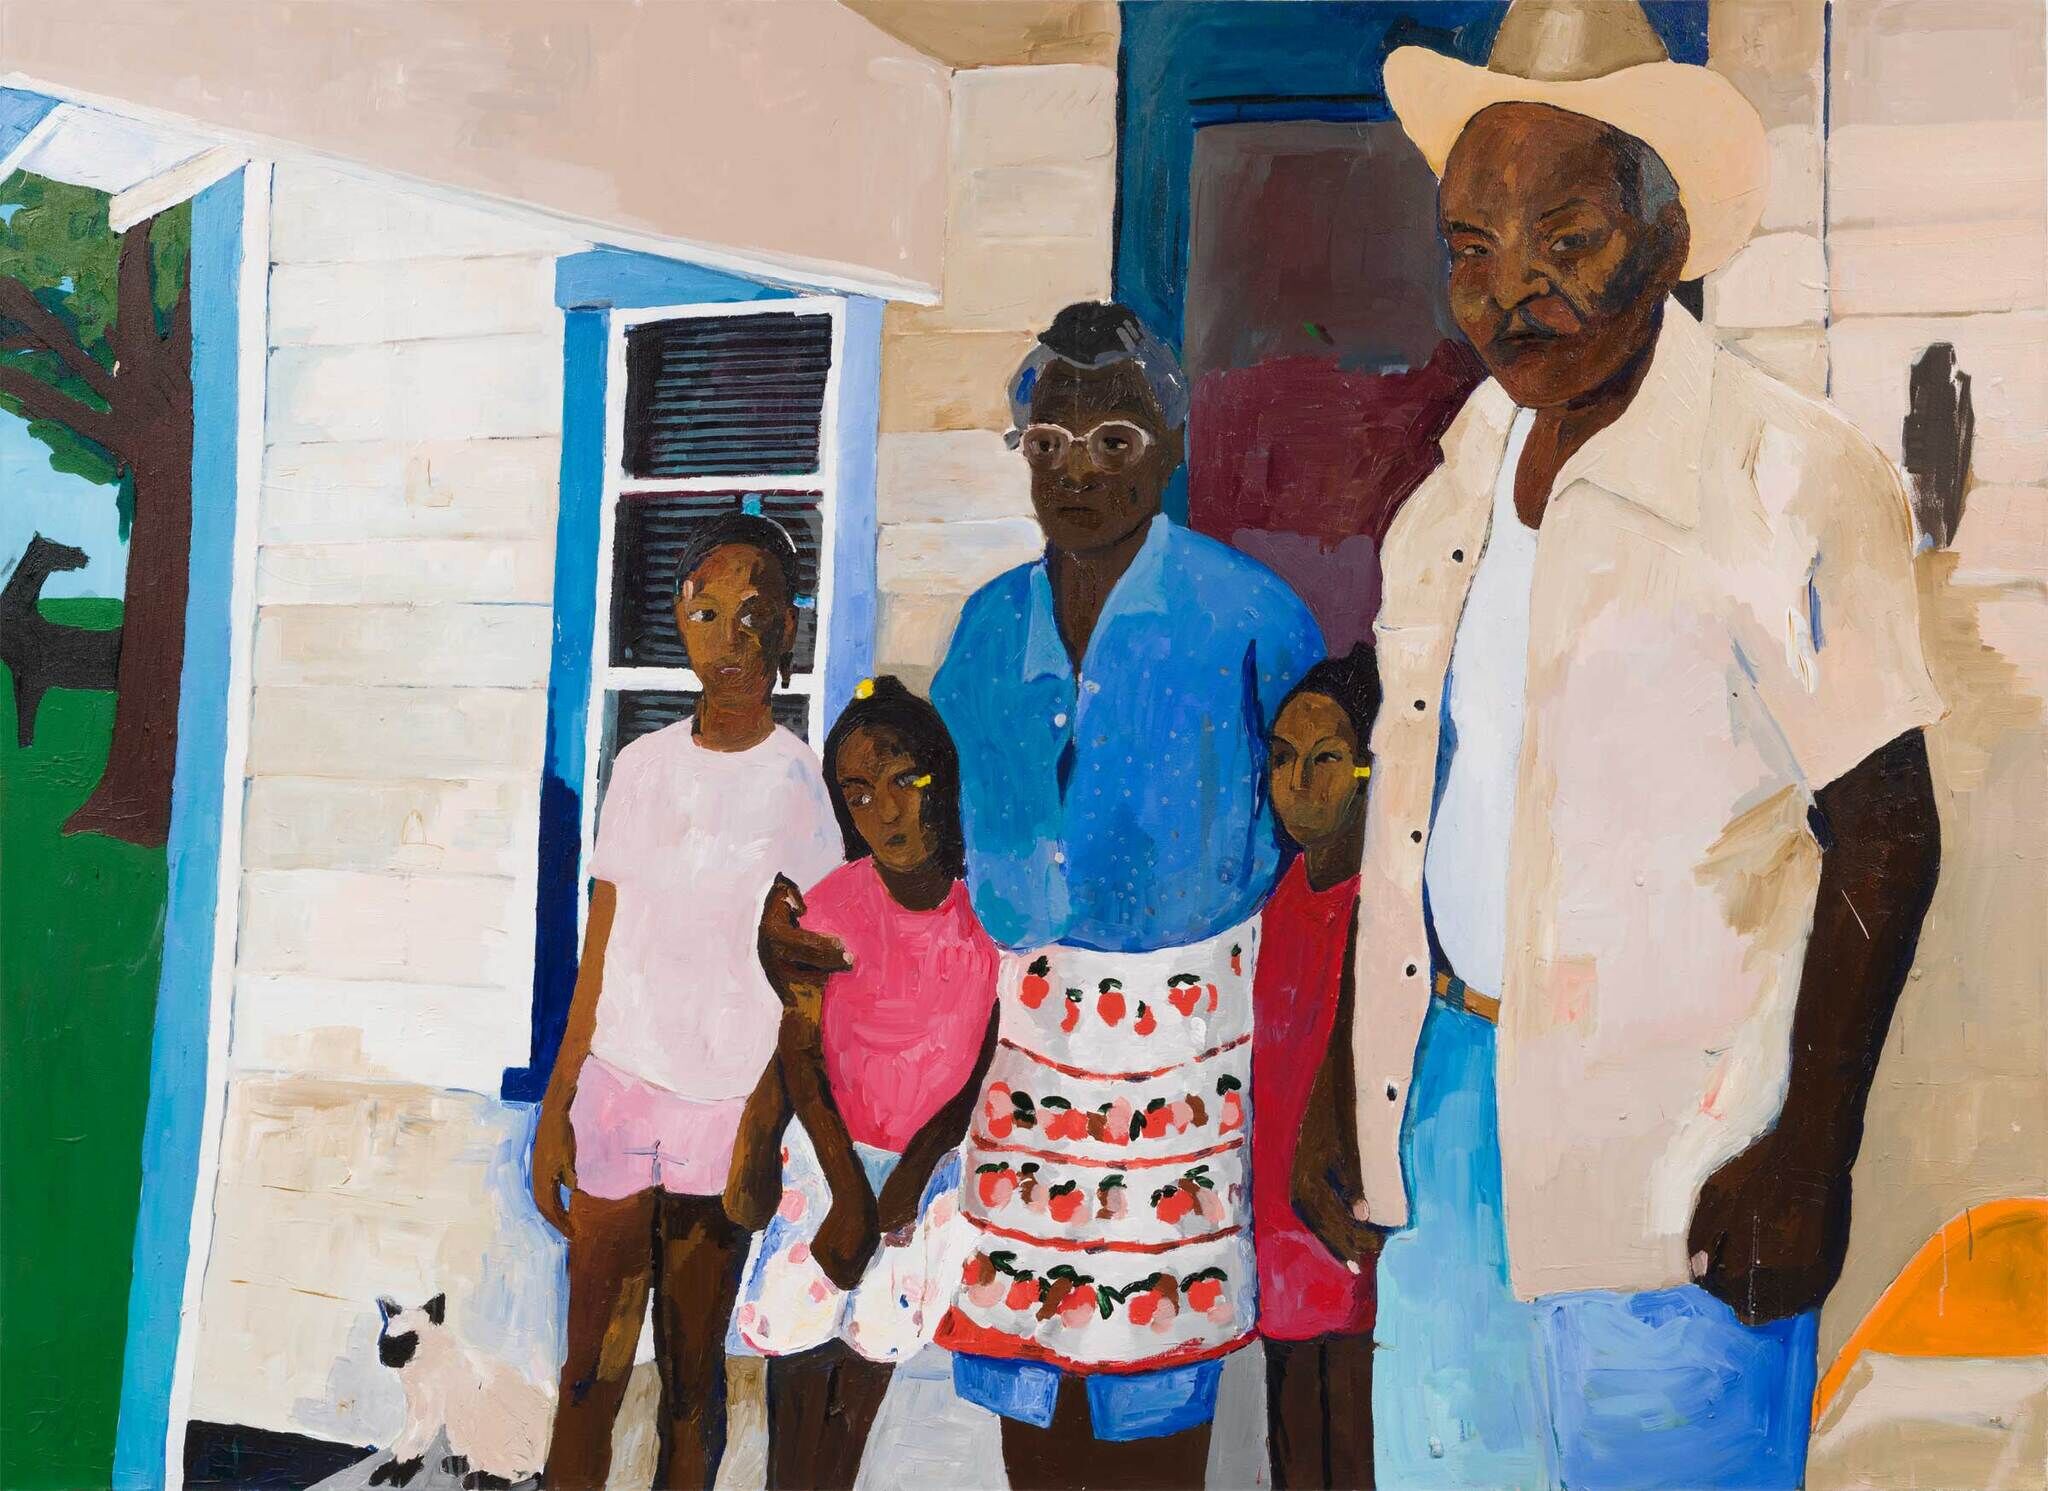 An elderly couple and three children stand in front of a white house with blue trim. On the left side of the painting, grass, a tree, and a horse are partially visible beyond the house. The older feminine figure is wearing a blue button-down dress with a white patterned apron tied at their waist. Their arms wrap around the shoulders of two of the children. The third child, who is slightly taller, stands to the left. The older masculine figure stands to the right of the others, wearing a cowboy hat, jeans, and beige collared shirt over a white undershirt.